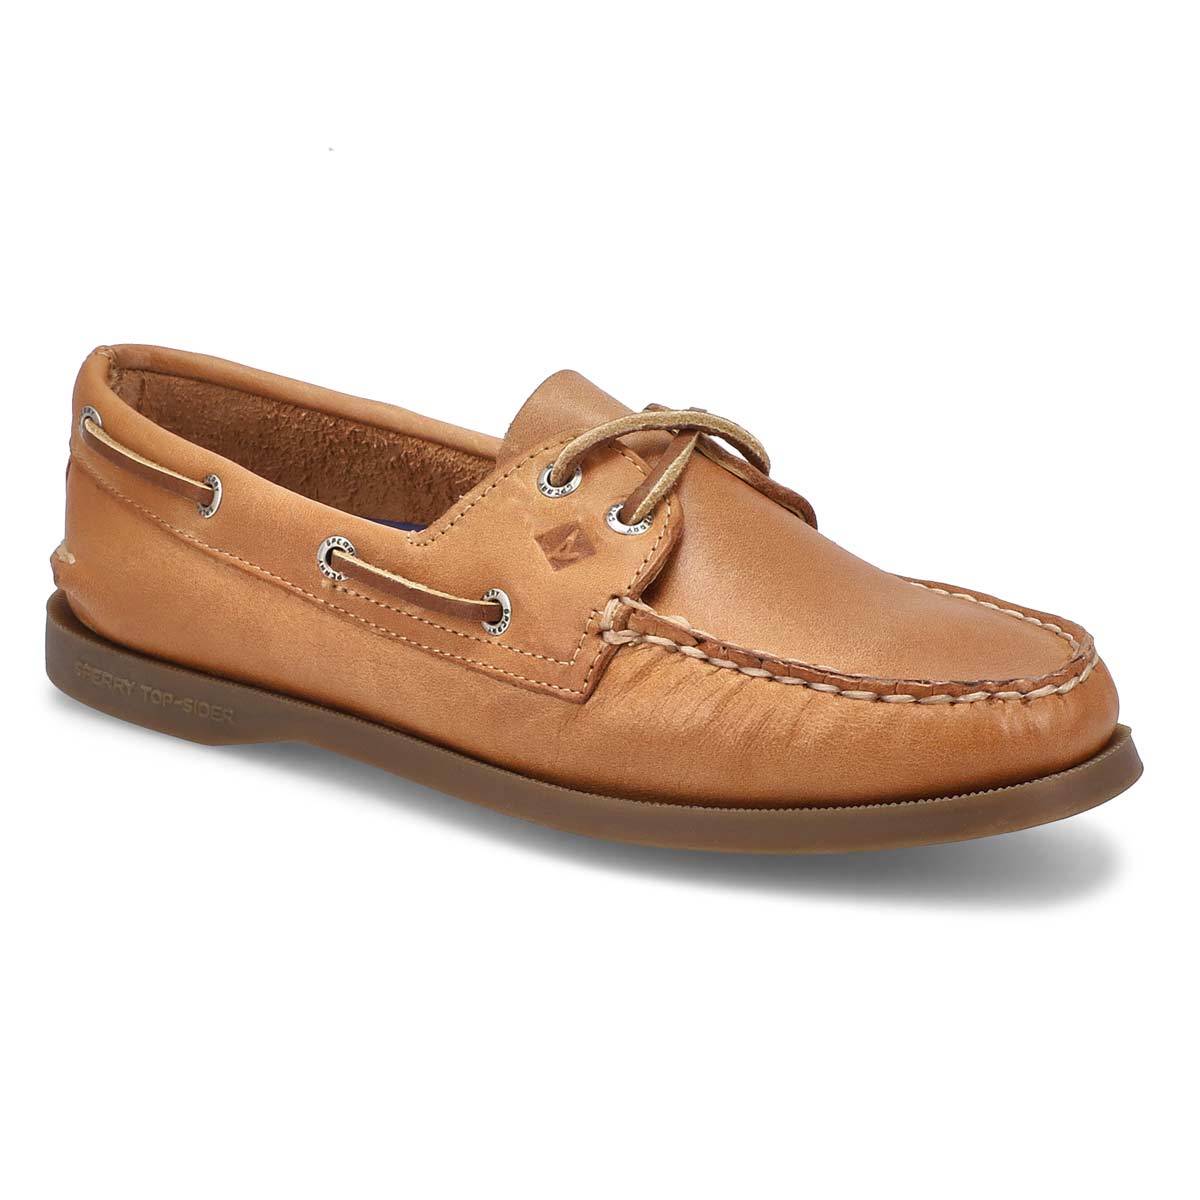 sperry women's shoes